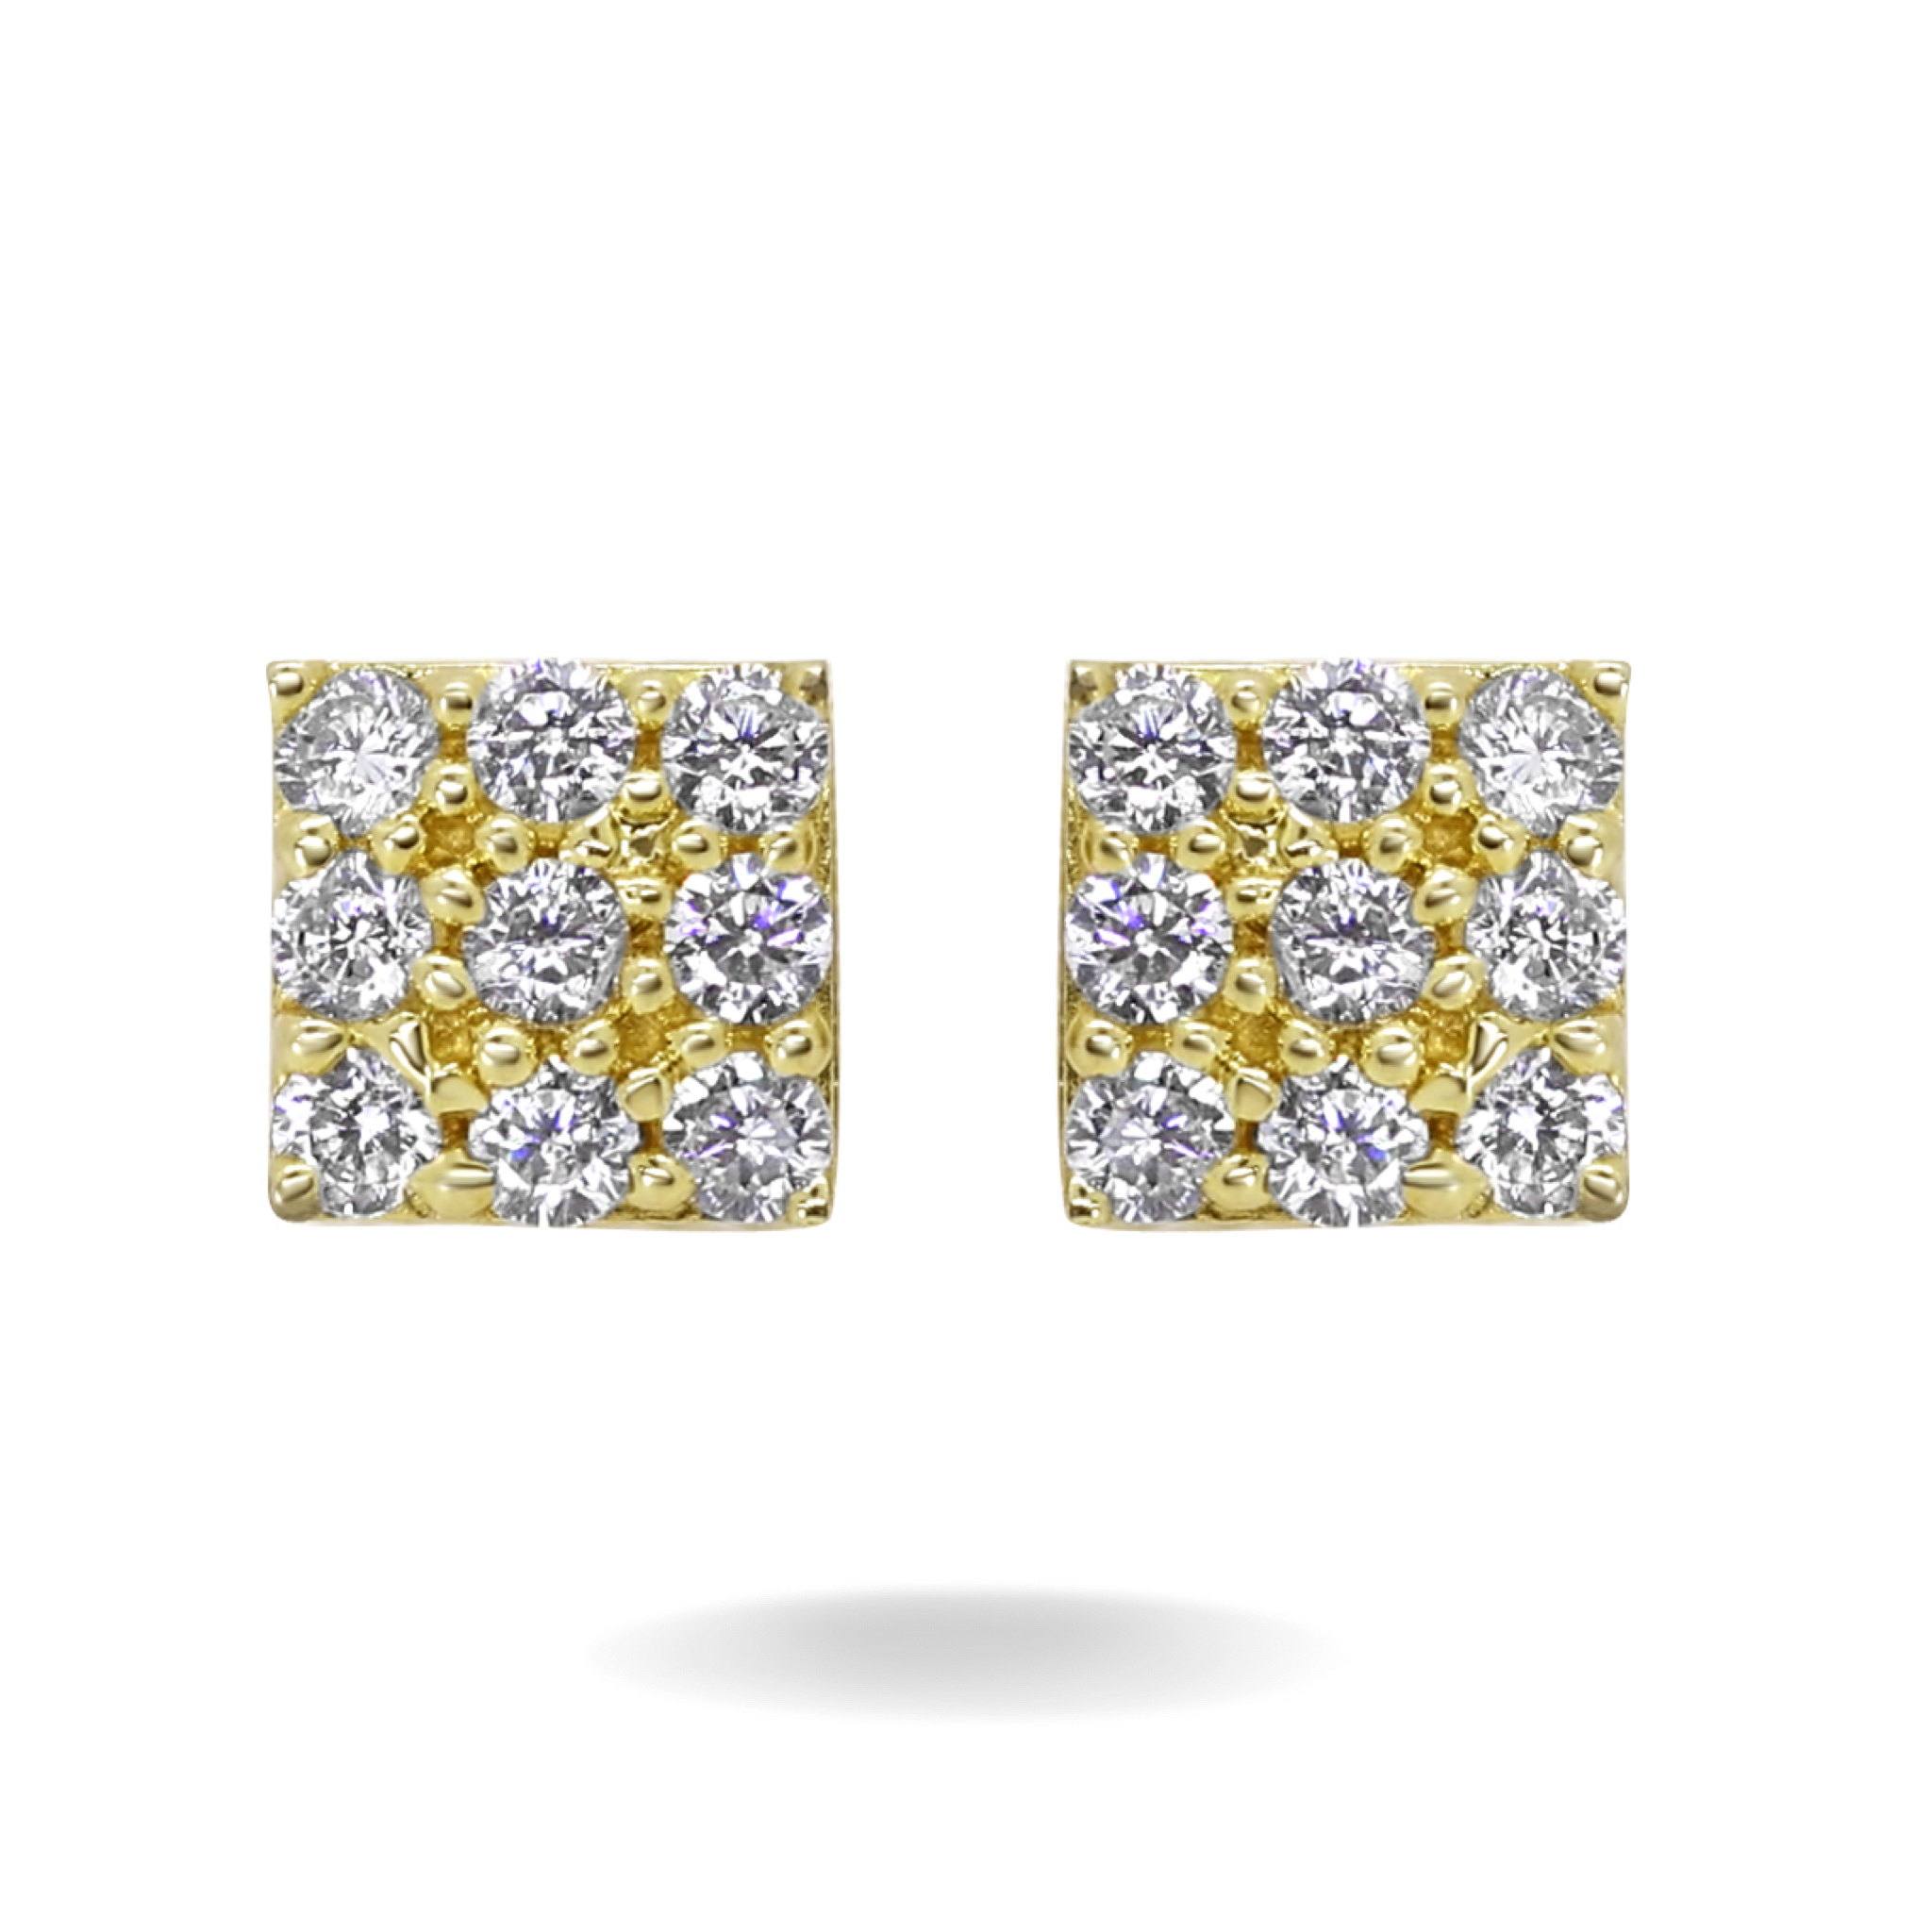 10K YELLOW GOLD PAVE SQUARE STUD EARRINGS -7MM